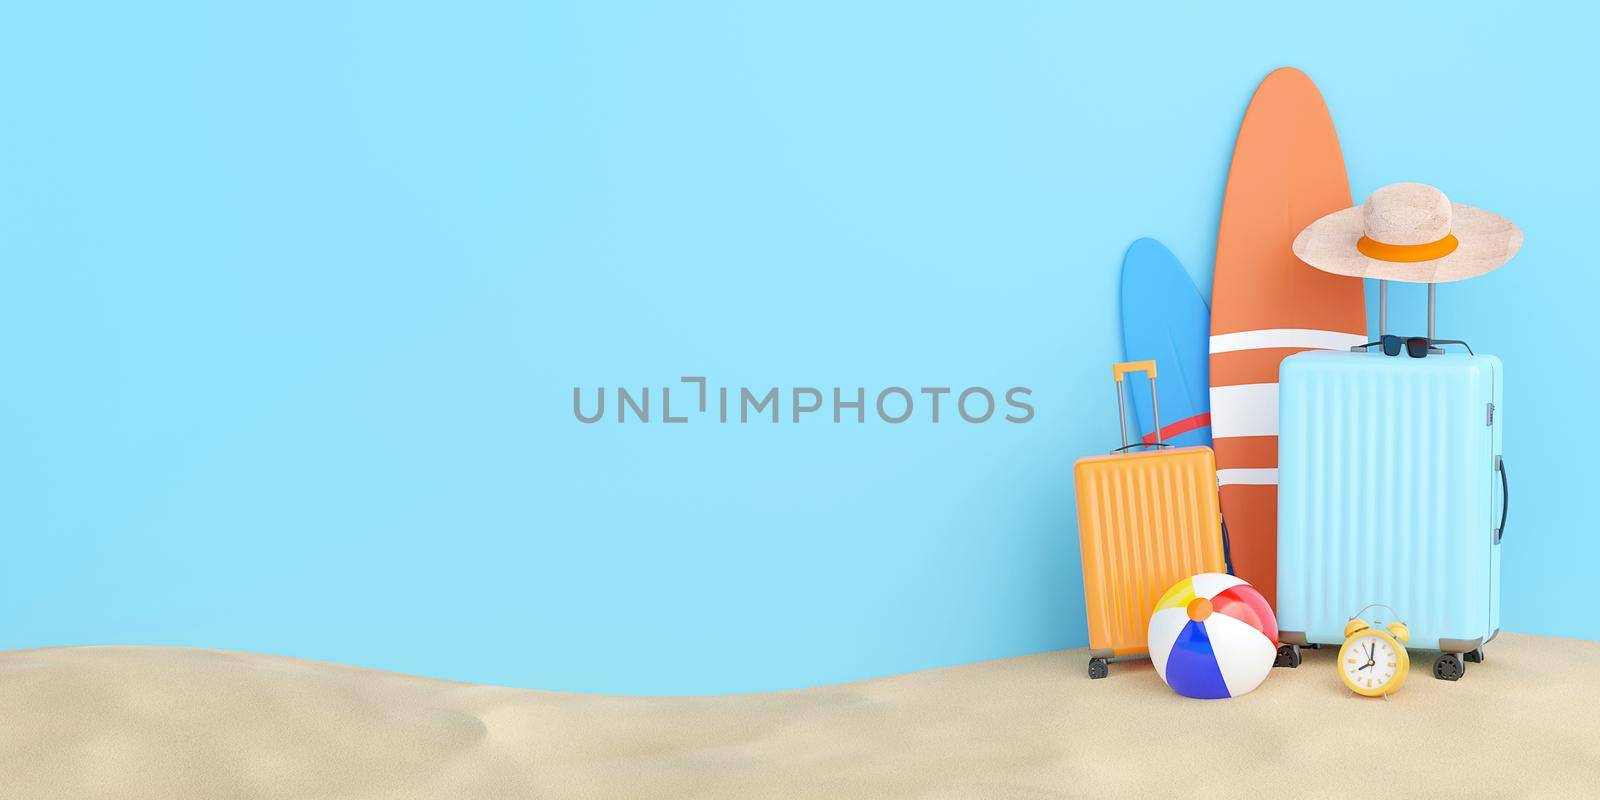 Suitcase with travel accessories and surfboard, summer concept, 3d illustration